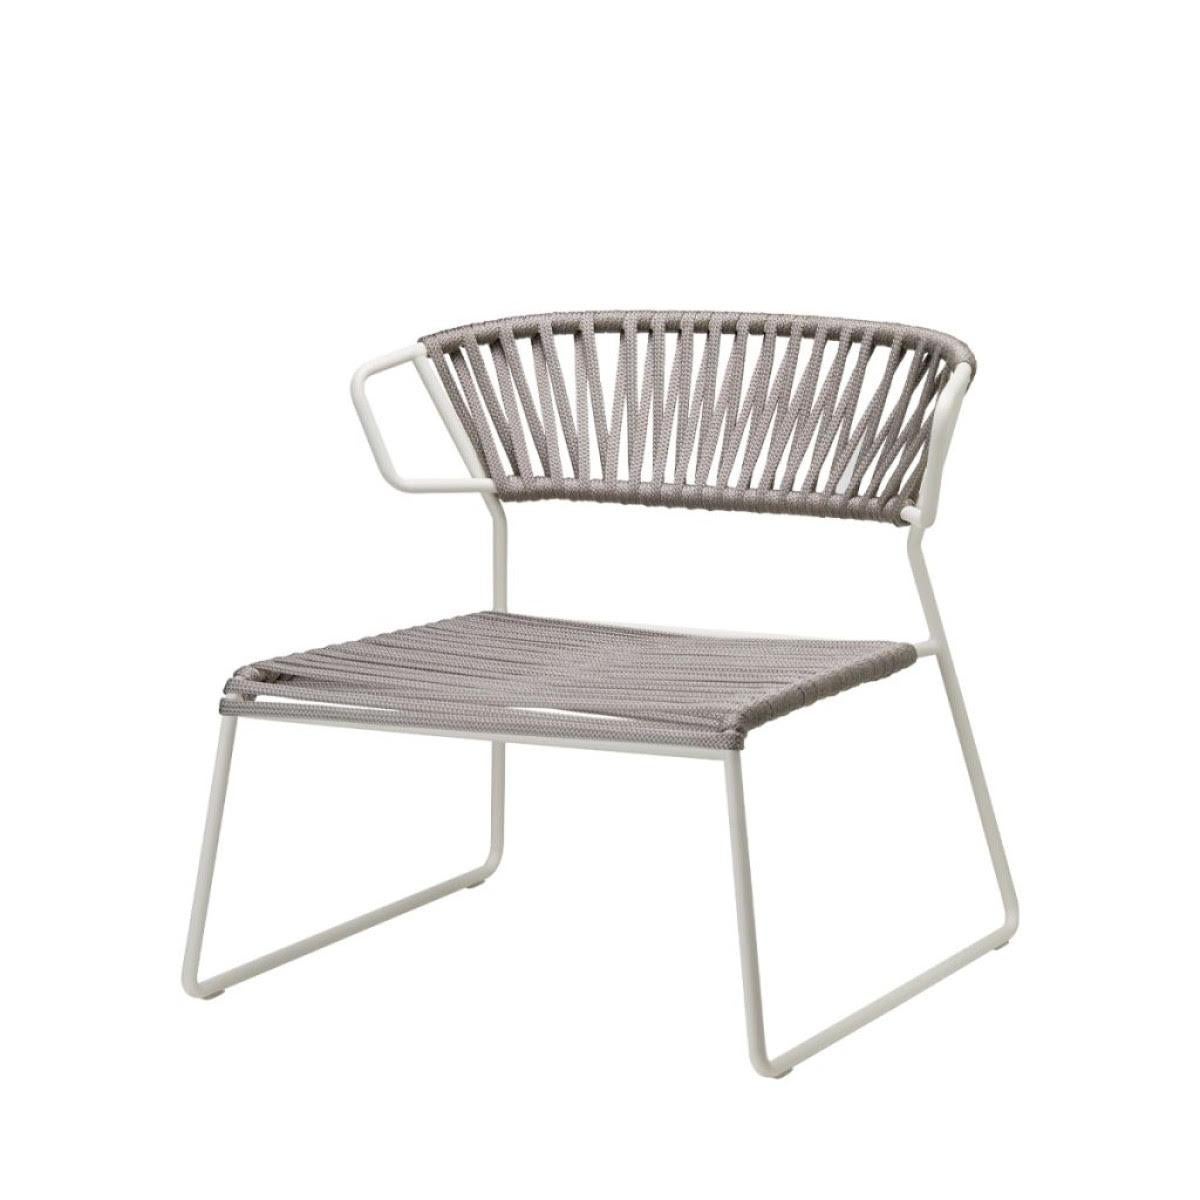 French Modern Grey Armchair Outdoor or Indoor in Metal and Ropes, 21 century For Sale